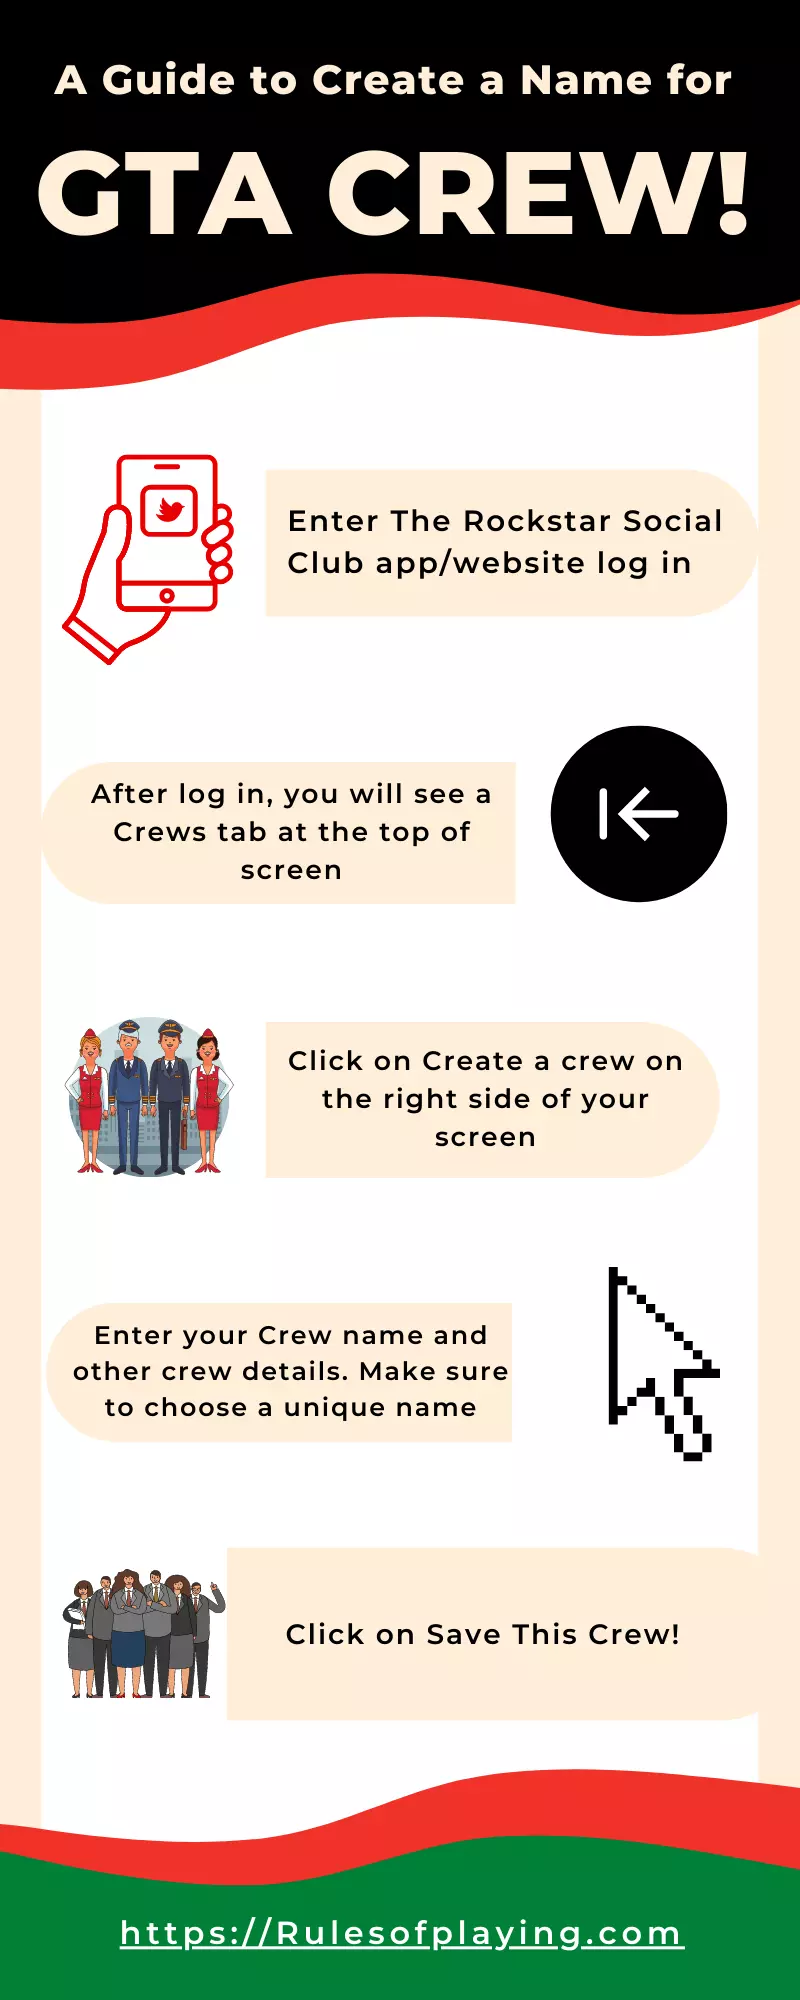 How to Create your own GTA Crew Name